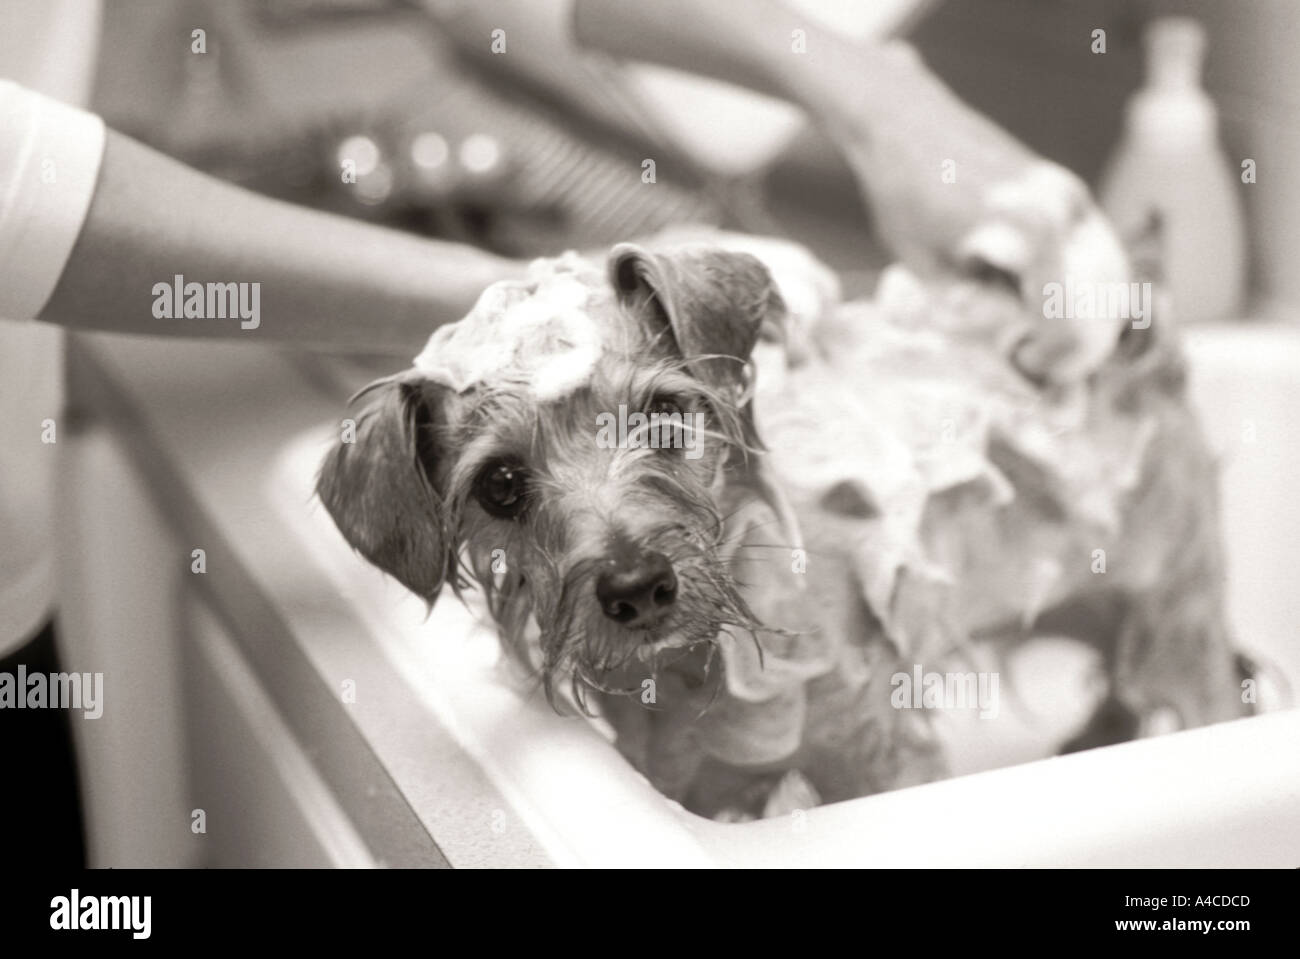 Norfolk terrier dog being given a bath in the kitchen sink Stock Photo